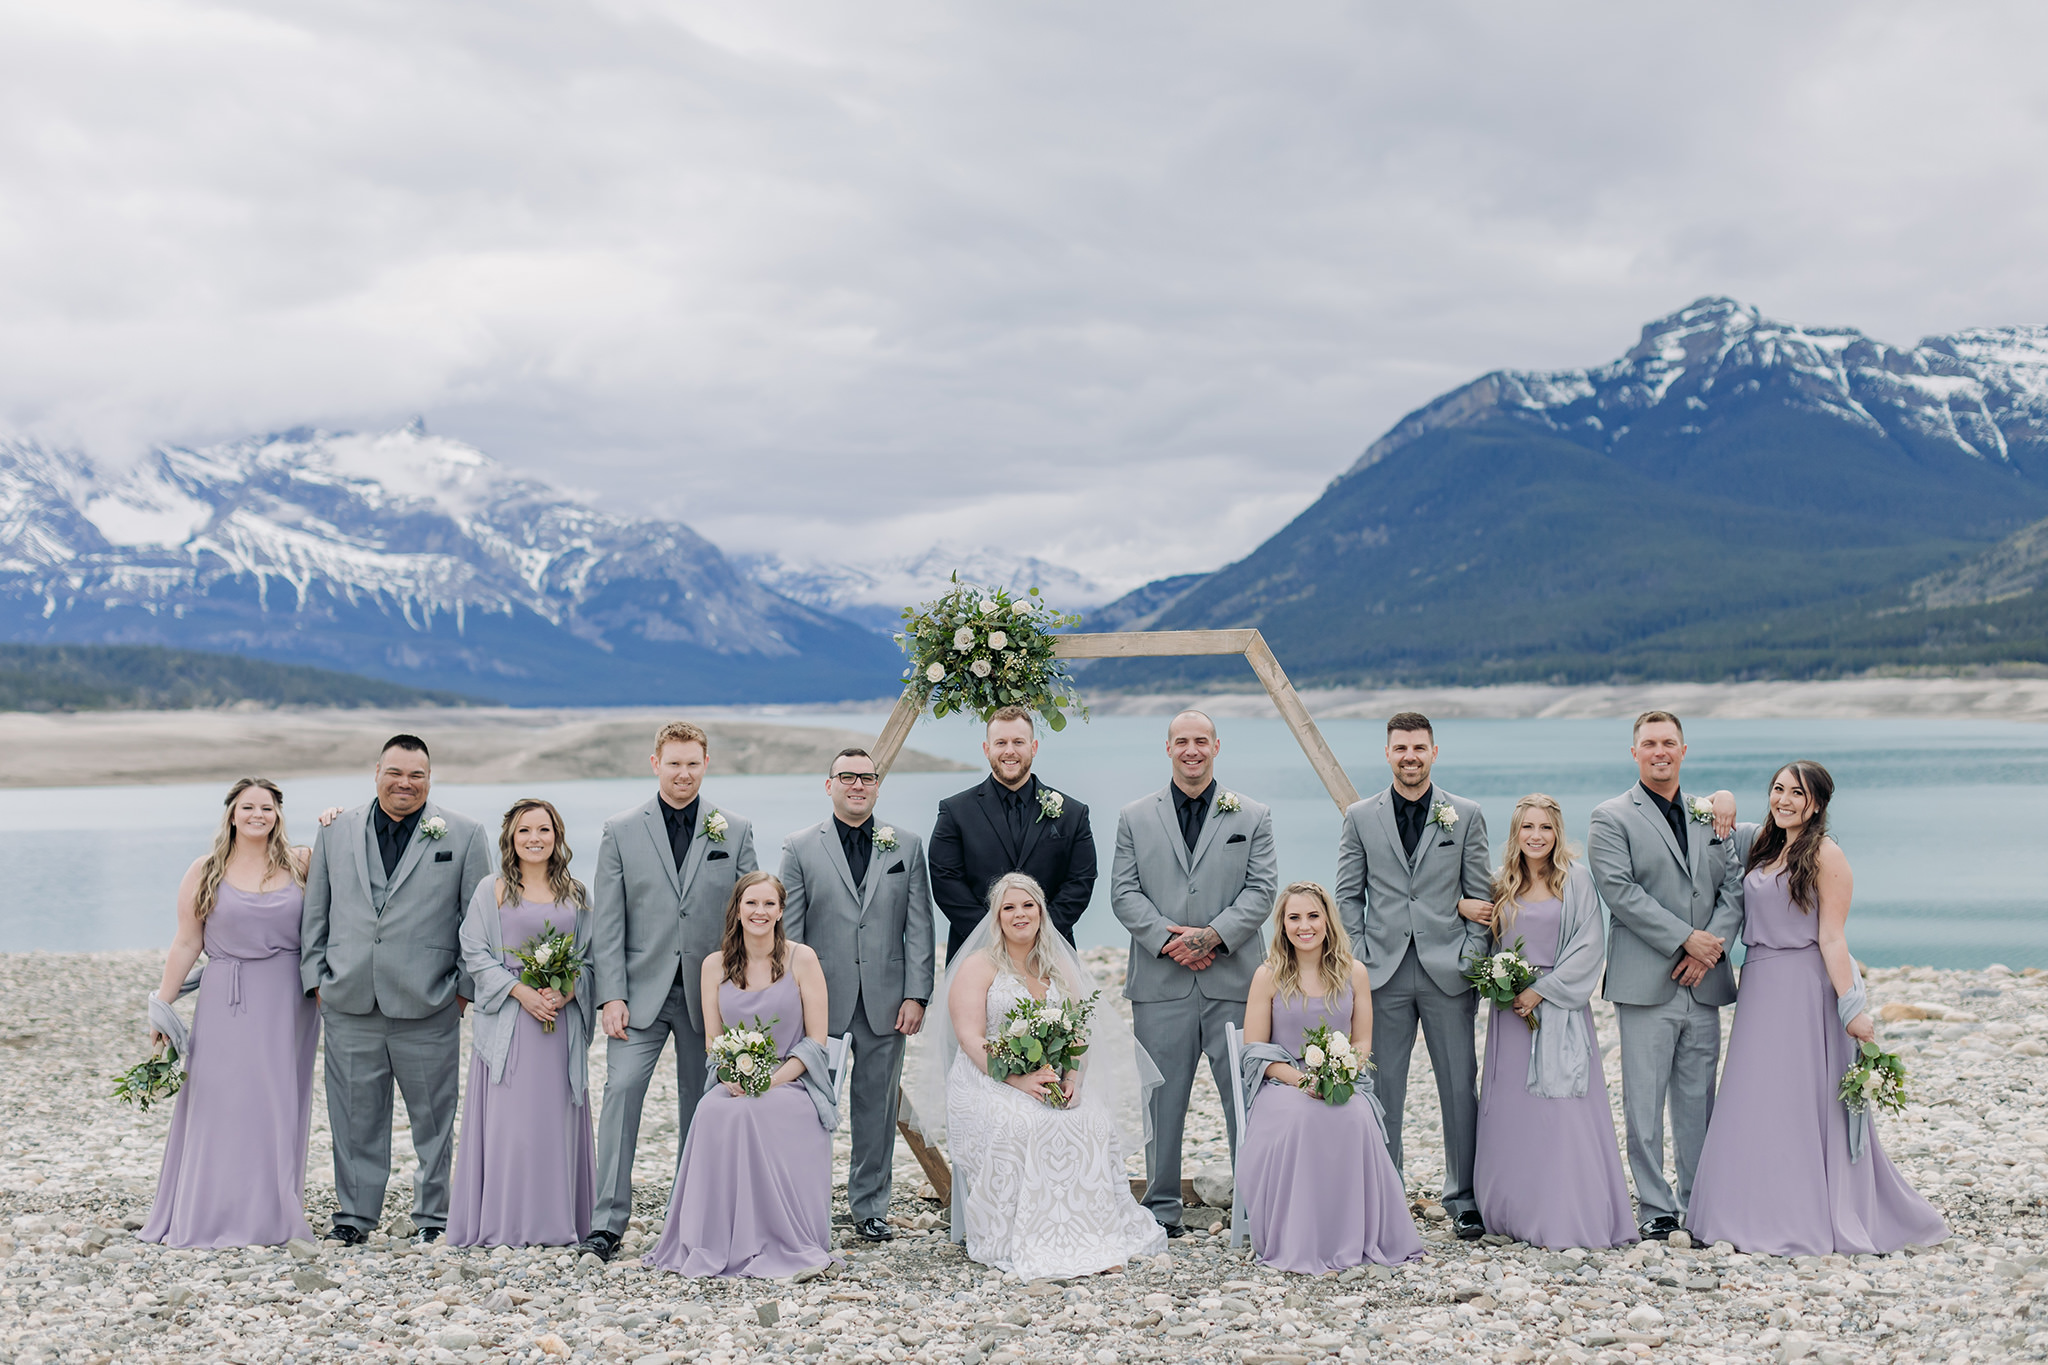 Abraham Lake Spring Mountain wedding with outdoor wedding portraits blue waters & mountains in the distance bridal party portraits